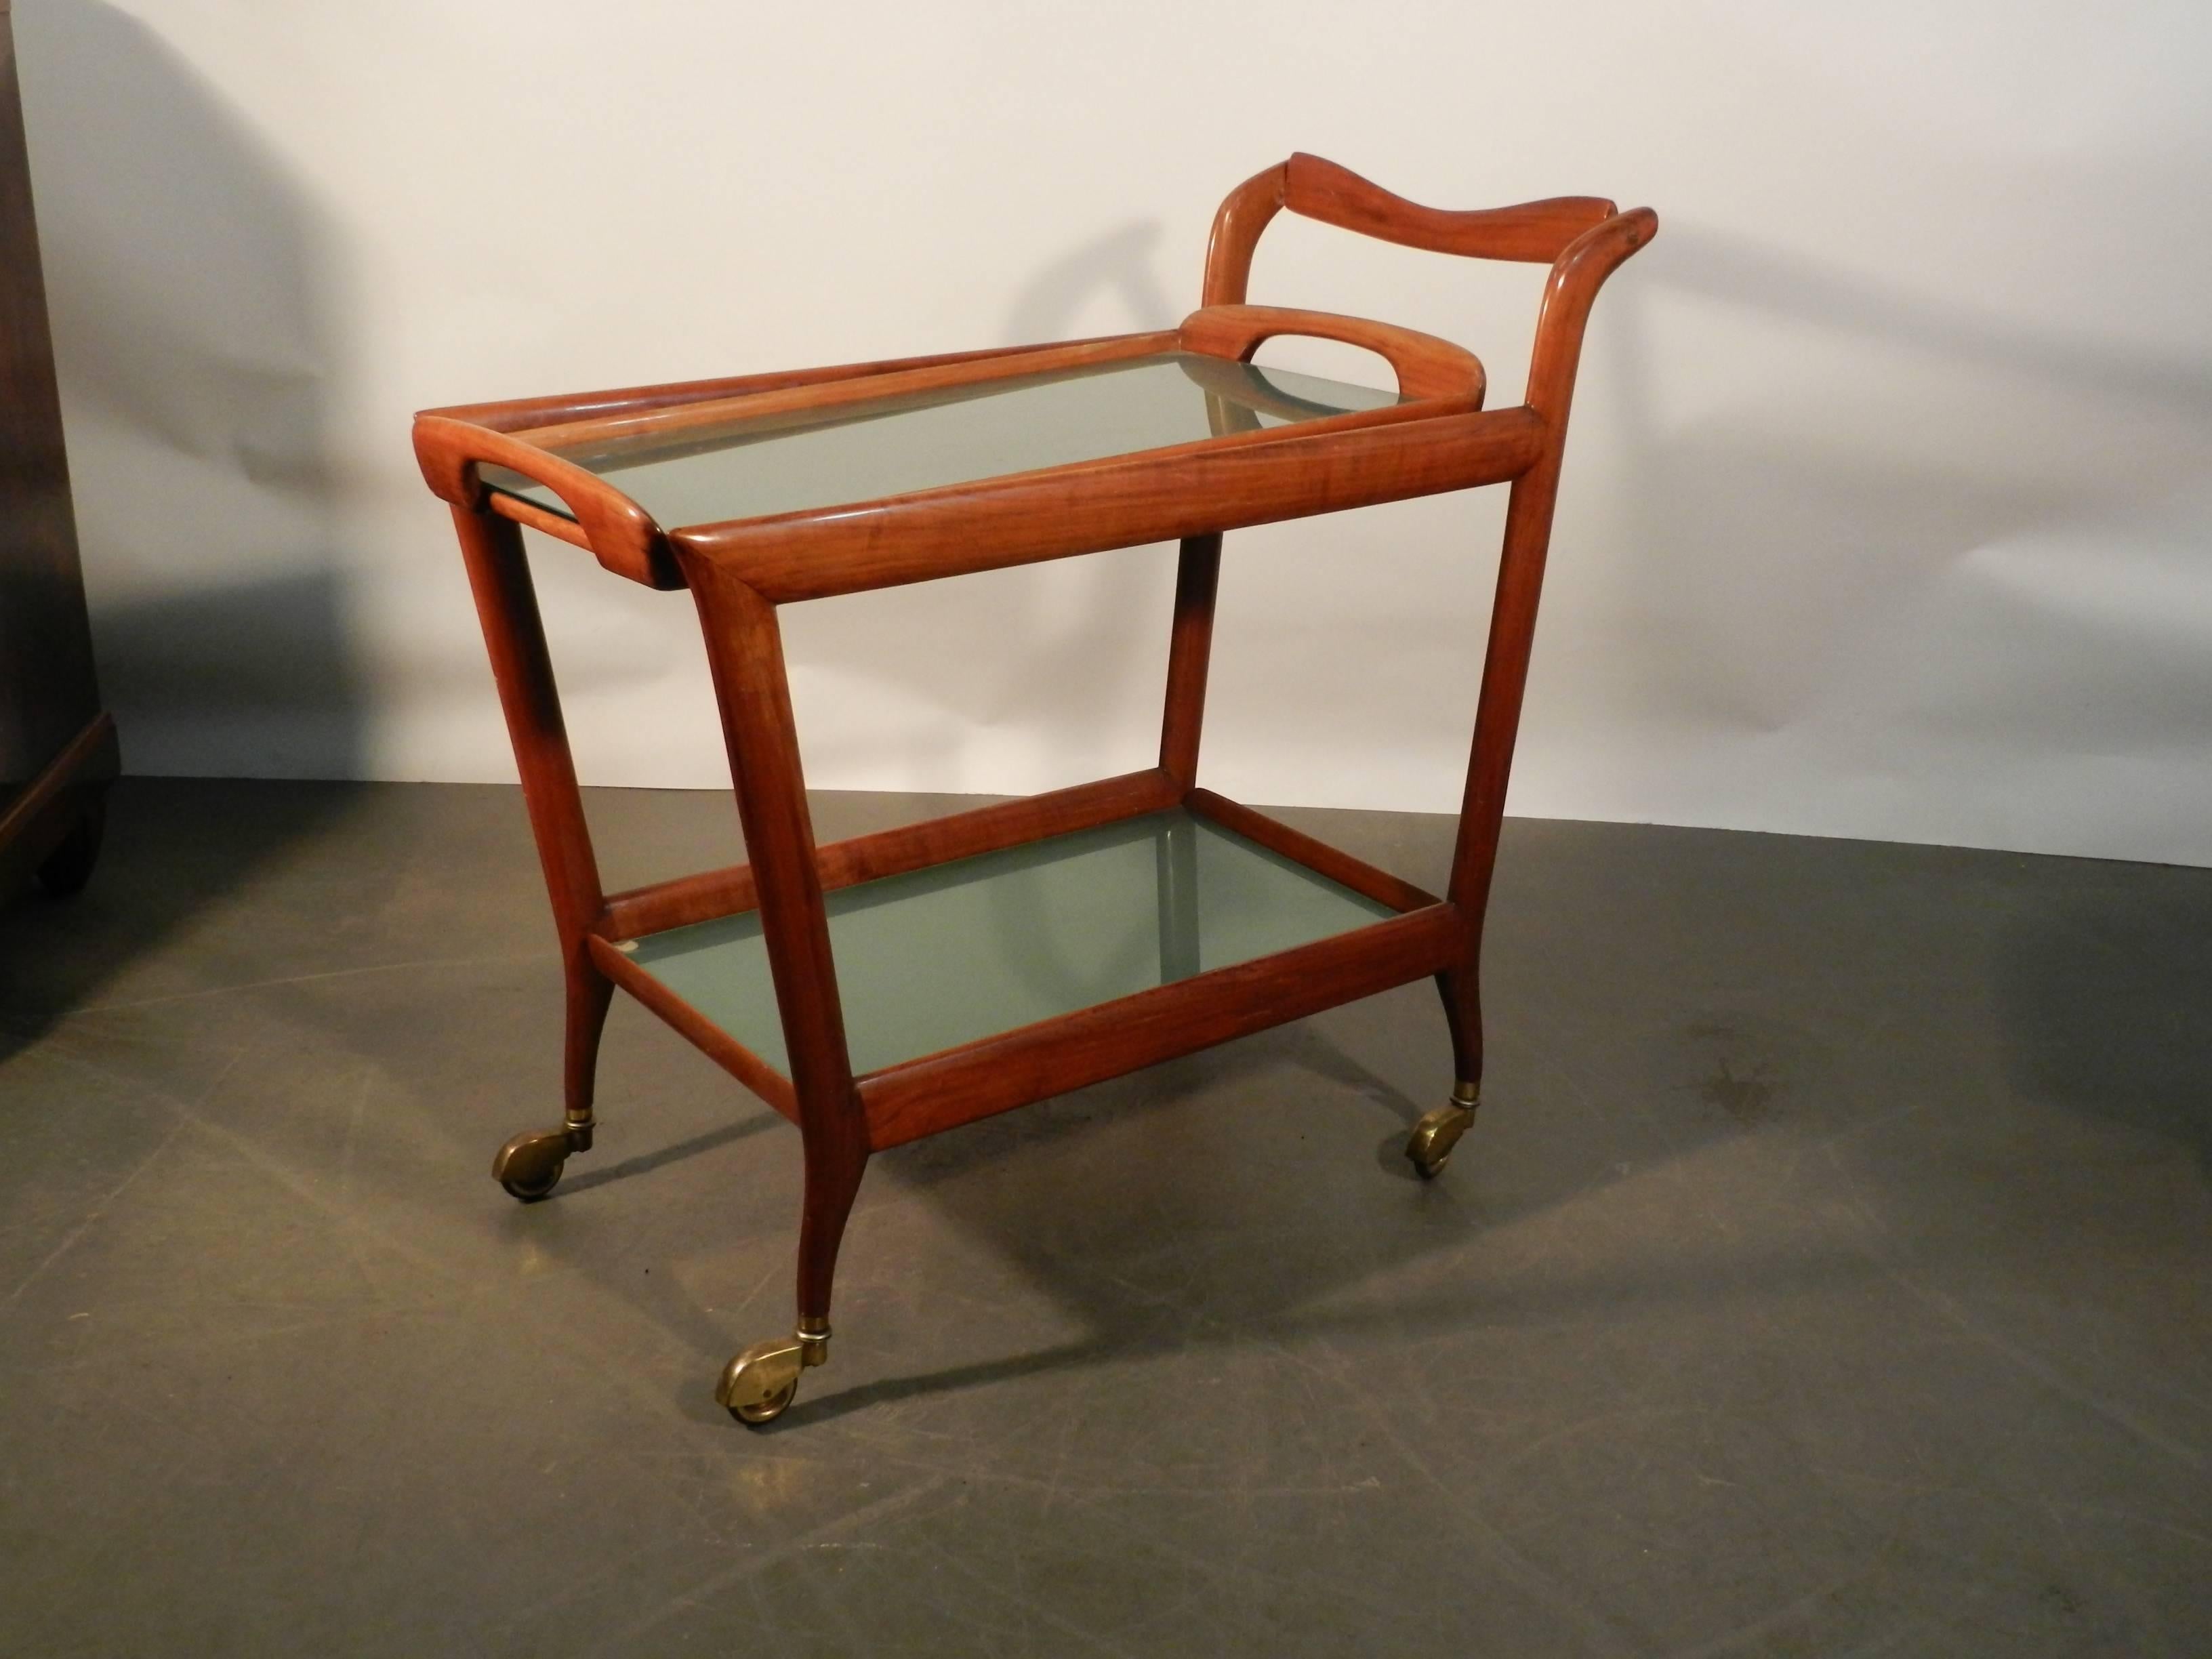 Ico Parisi (attributed to), wood and blue-toned glass trolley, Italy, 1950.
Removable tray on the top.